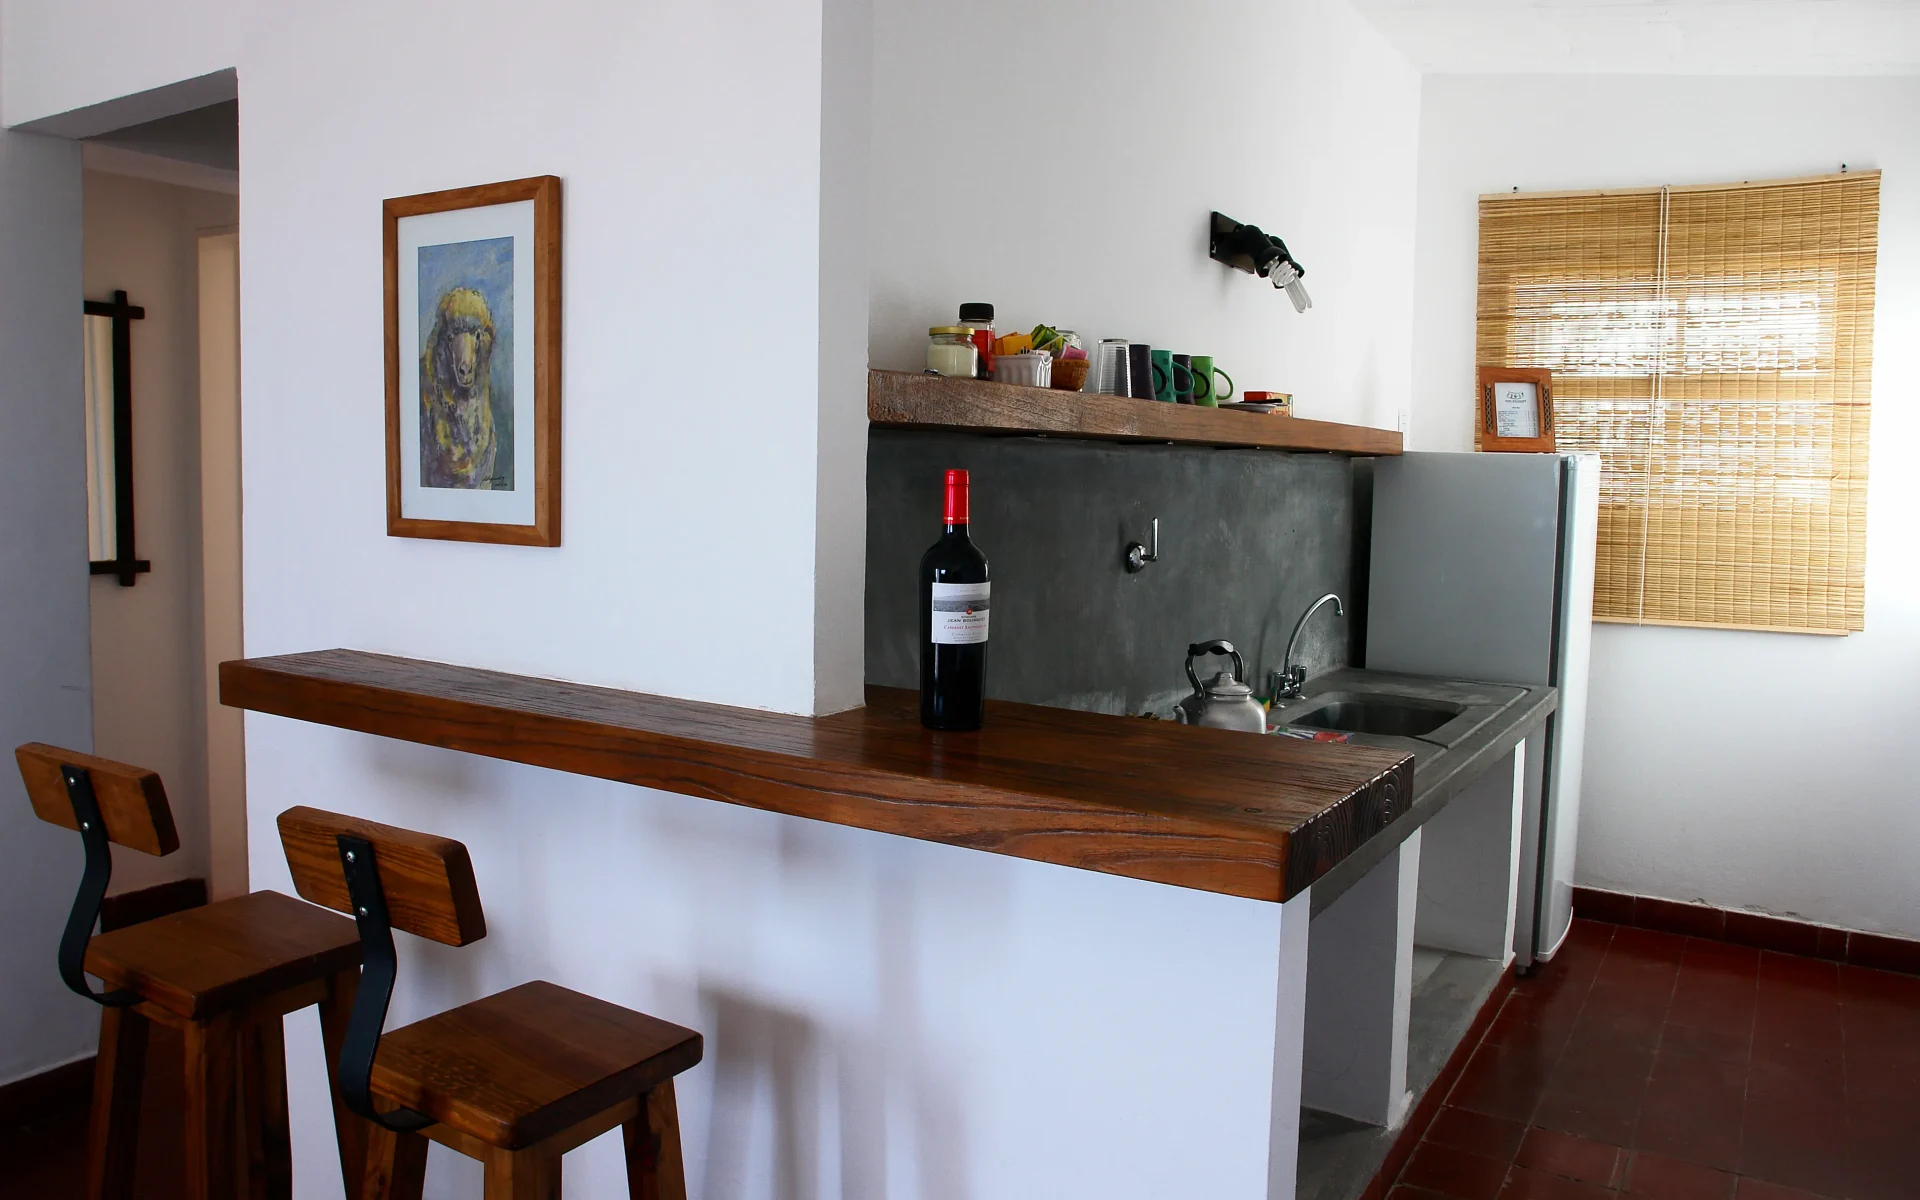 A Kitchenette in one of the Superior Sea Cabins has a traditional and stripped-back style. A bottle of red wine sits on the counter.